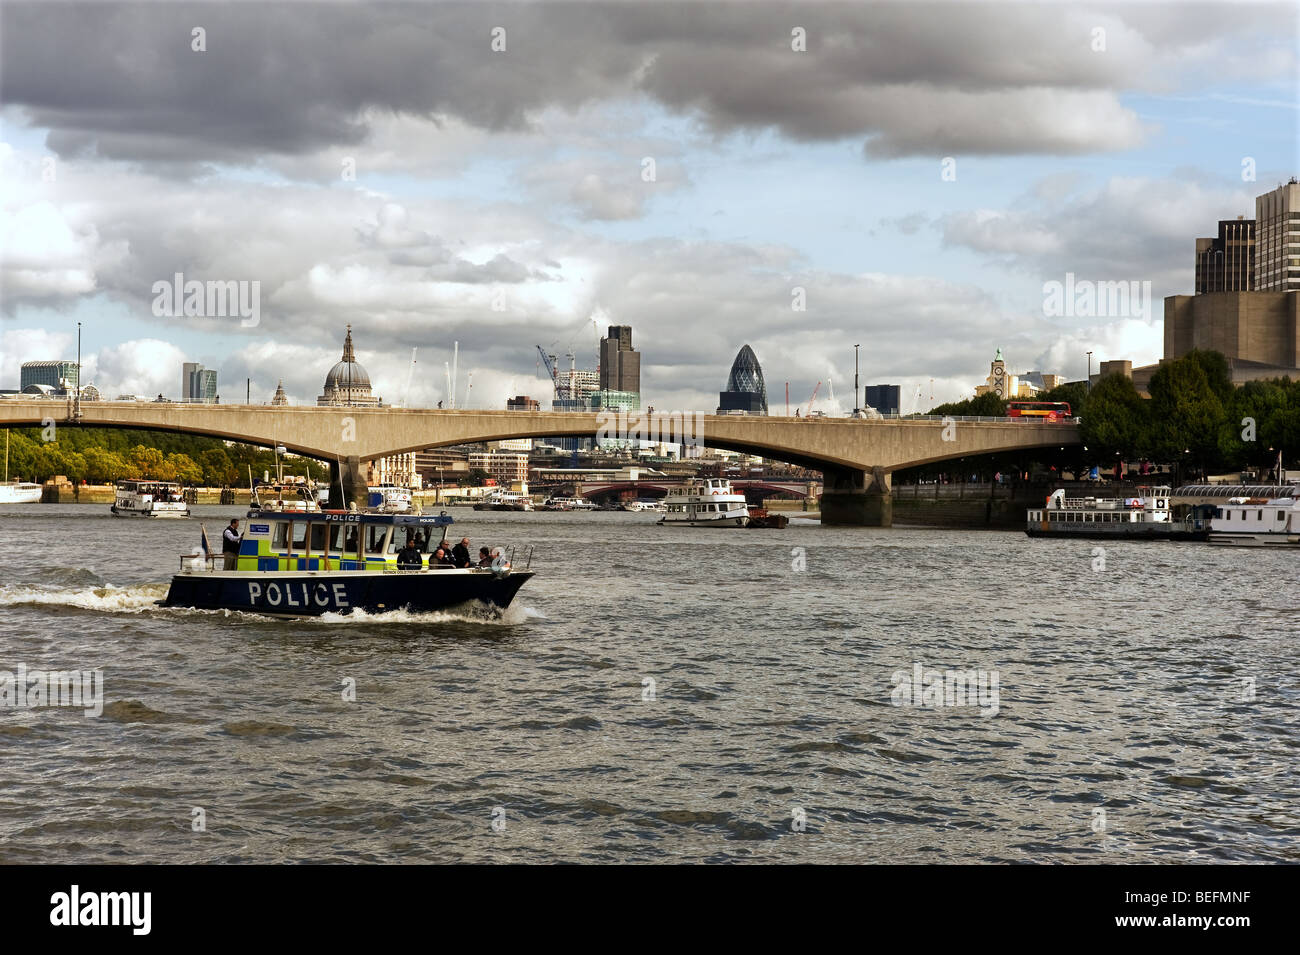 A Thames River Police boat patrolling on the River Thames in London. Stock Photo